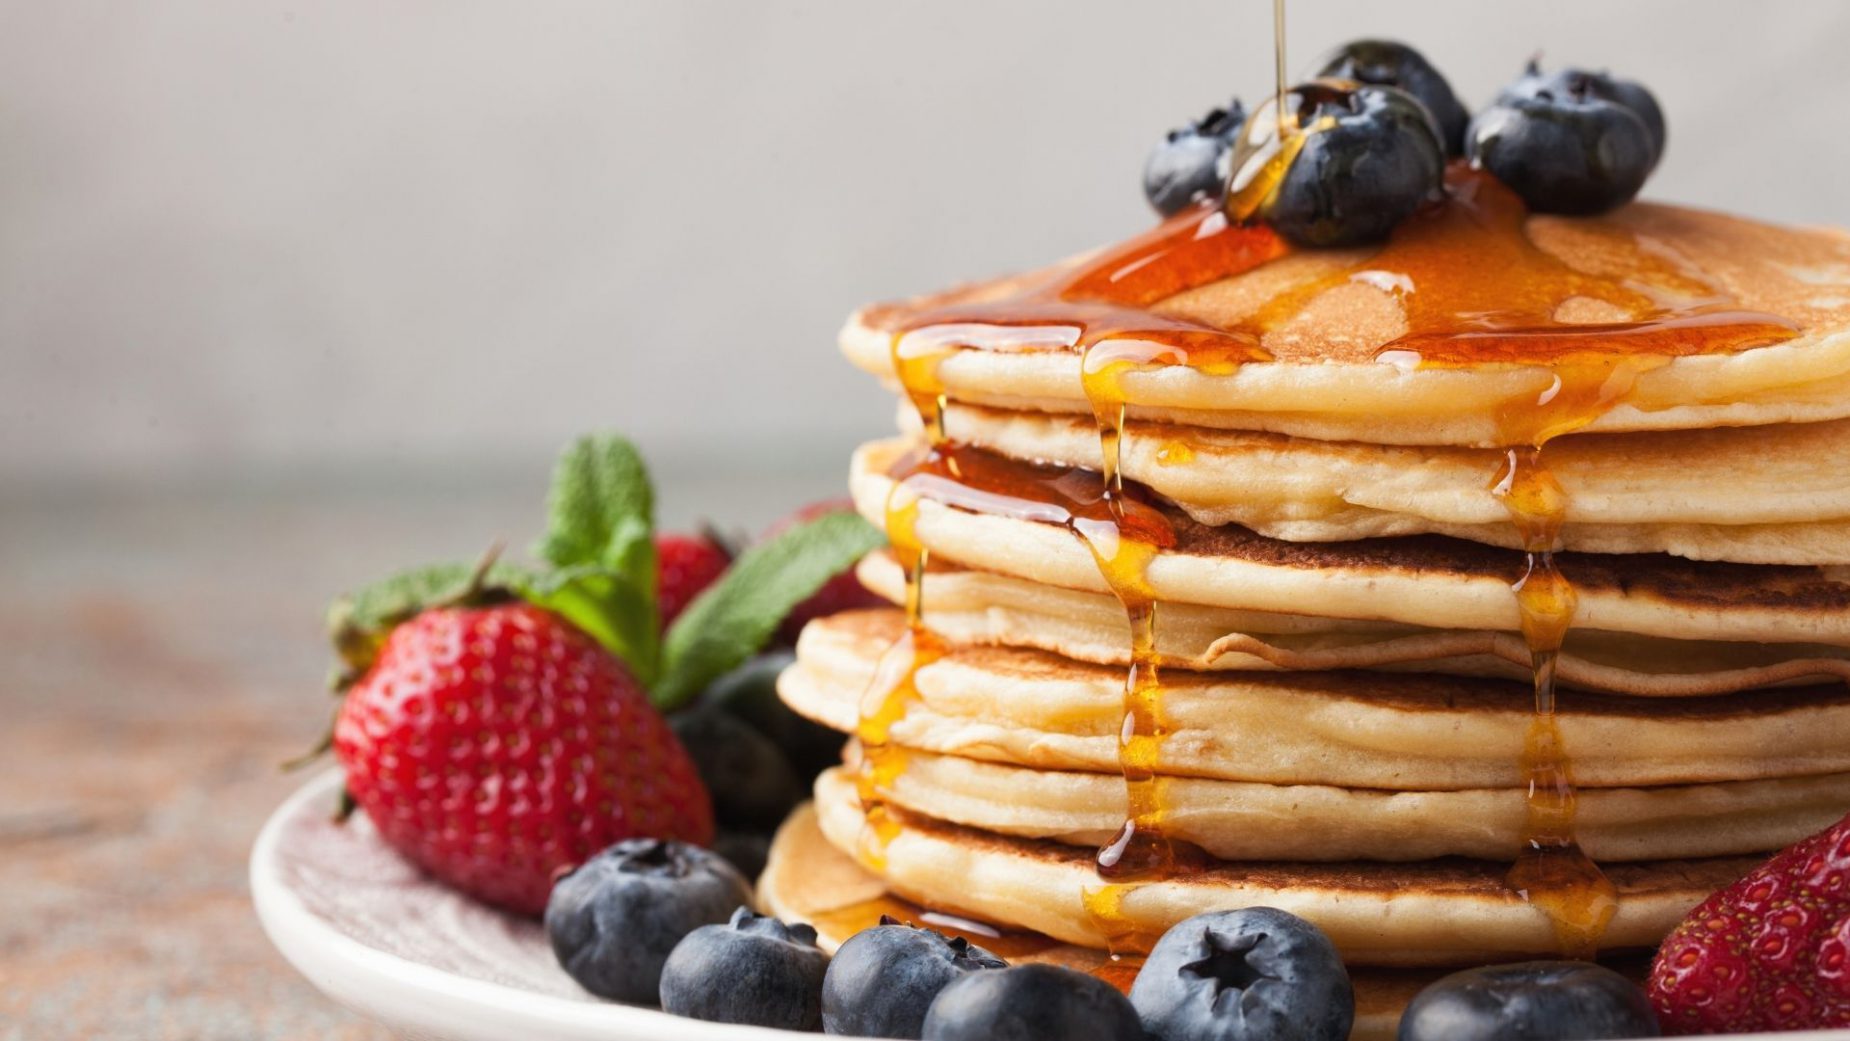 Global Syrup, Seasoning, Oils, & General Food Market Outlook, Opportunities And Strategies – Includes Syrup, Seasoning, Oils, & General Food Market Overview